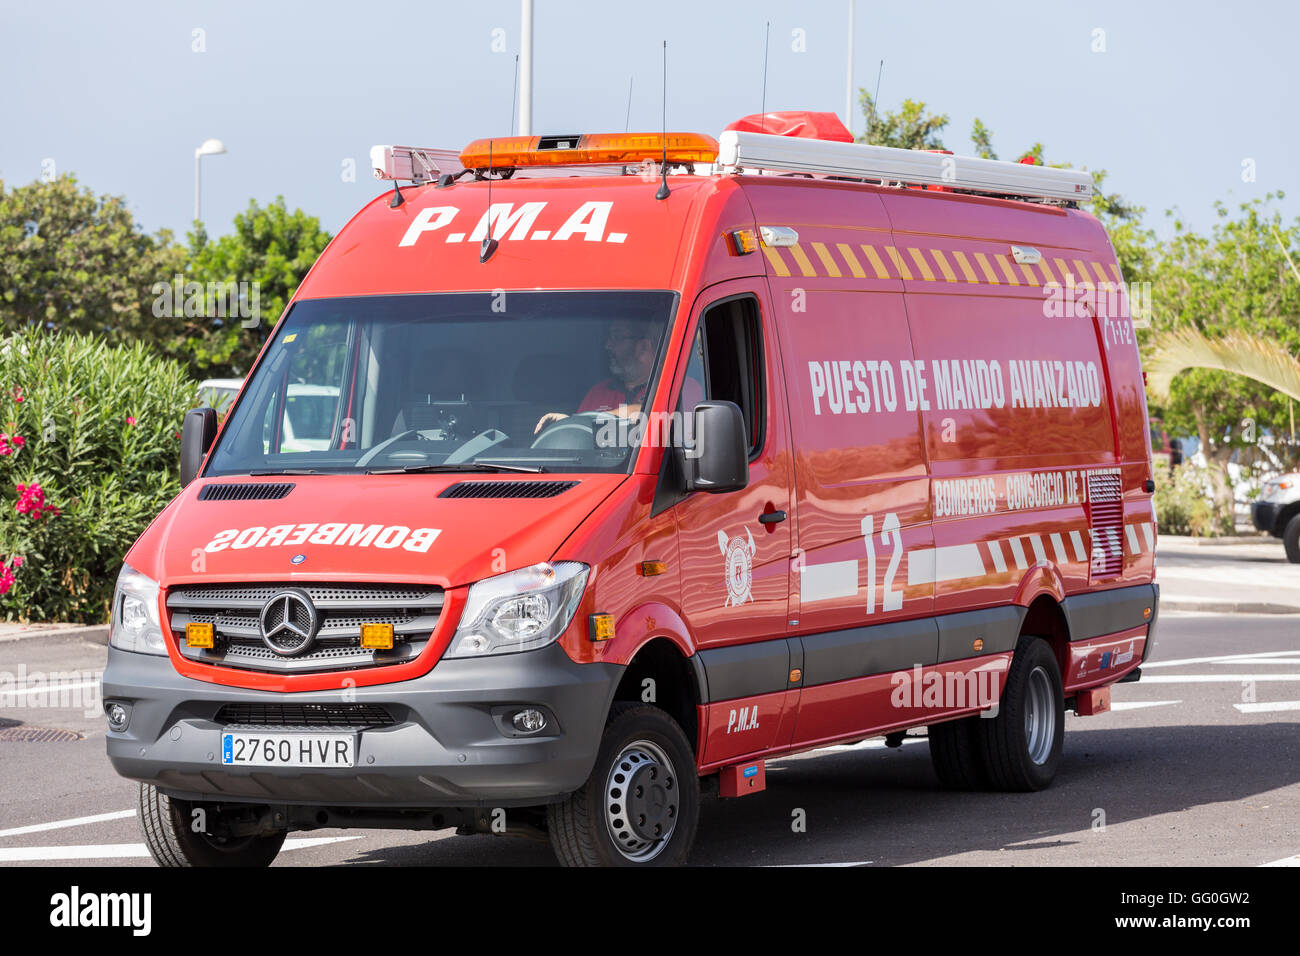 Spanish firefighters mobile command vehicle Stock Photo